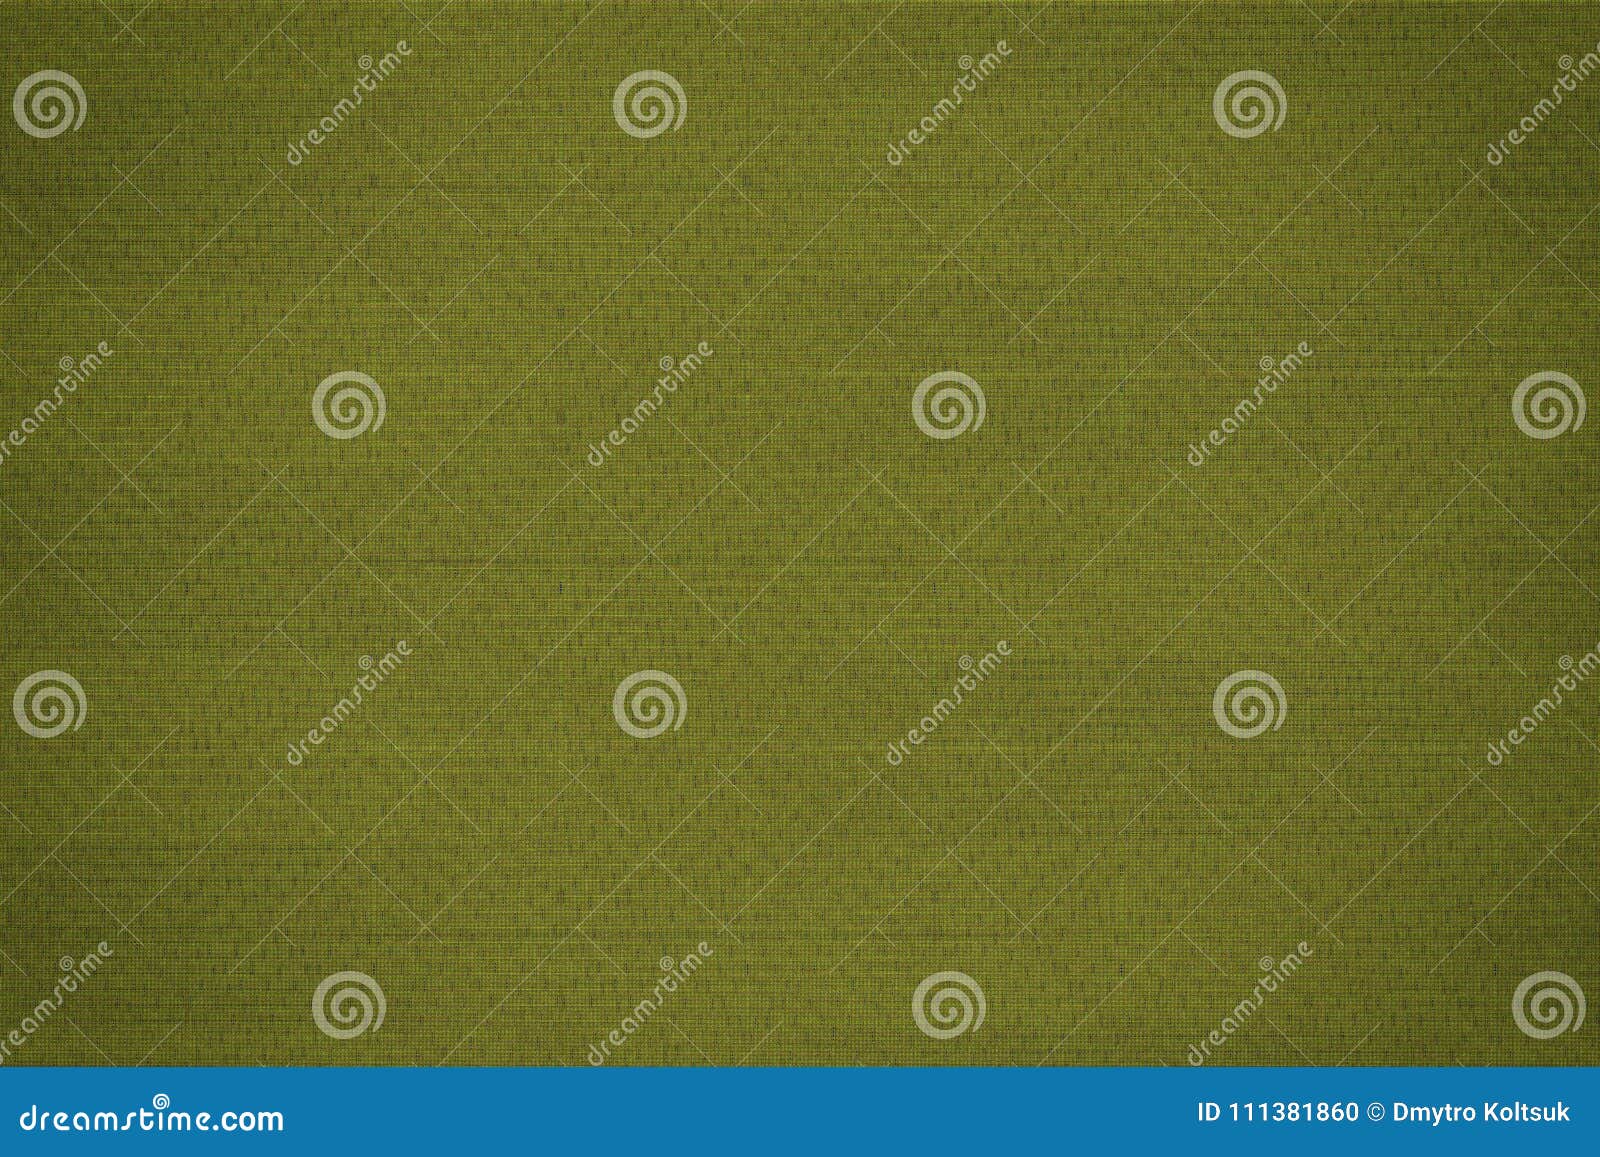 golden lime colored fabric texture, textile background flax surface, canvas swatch